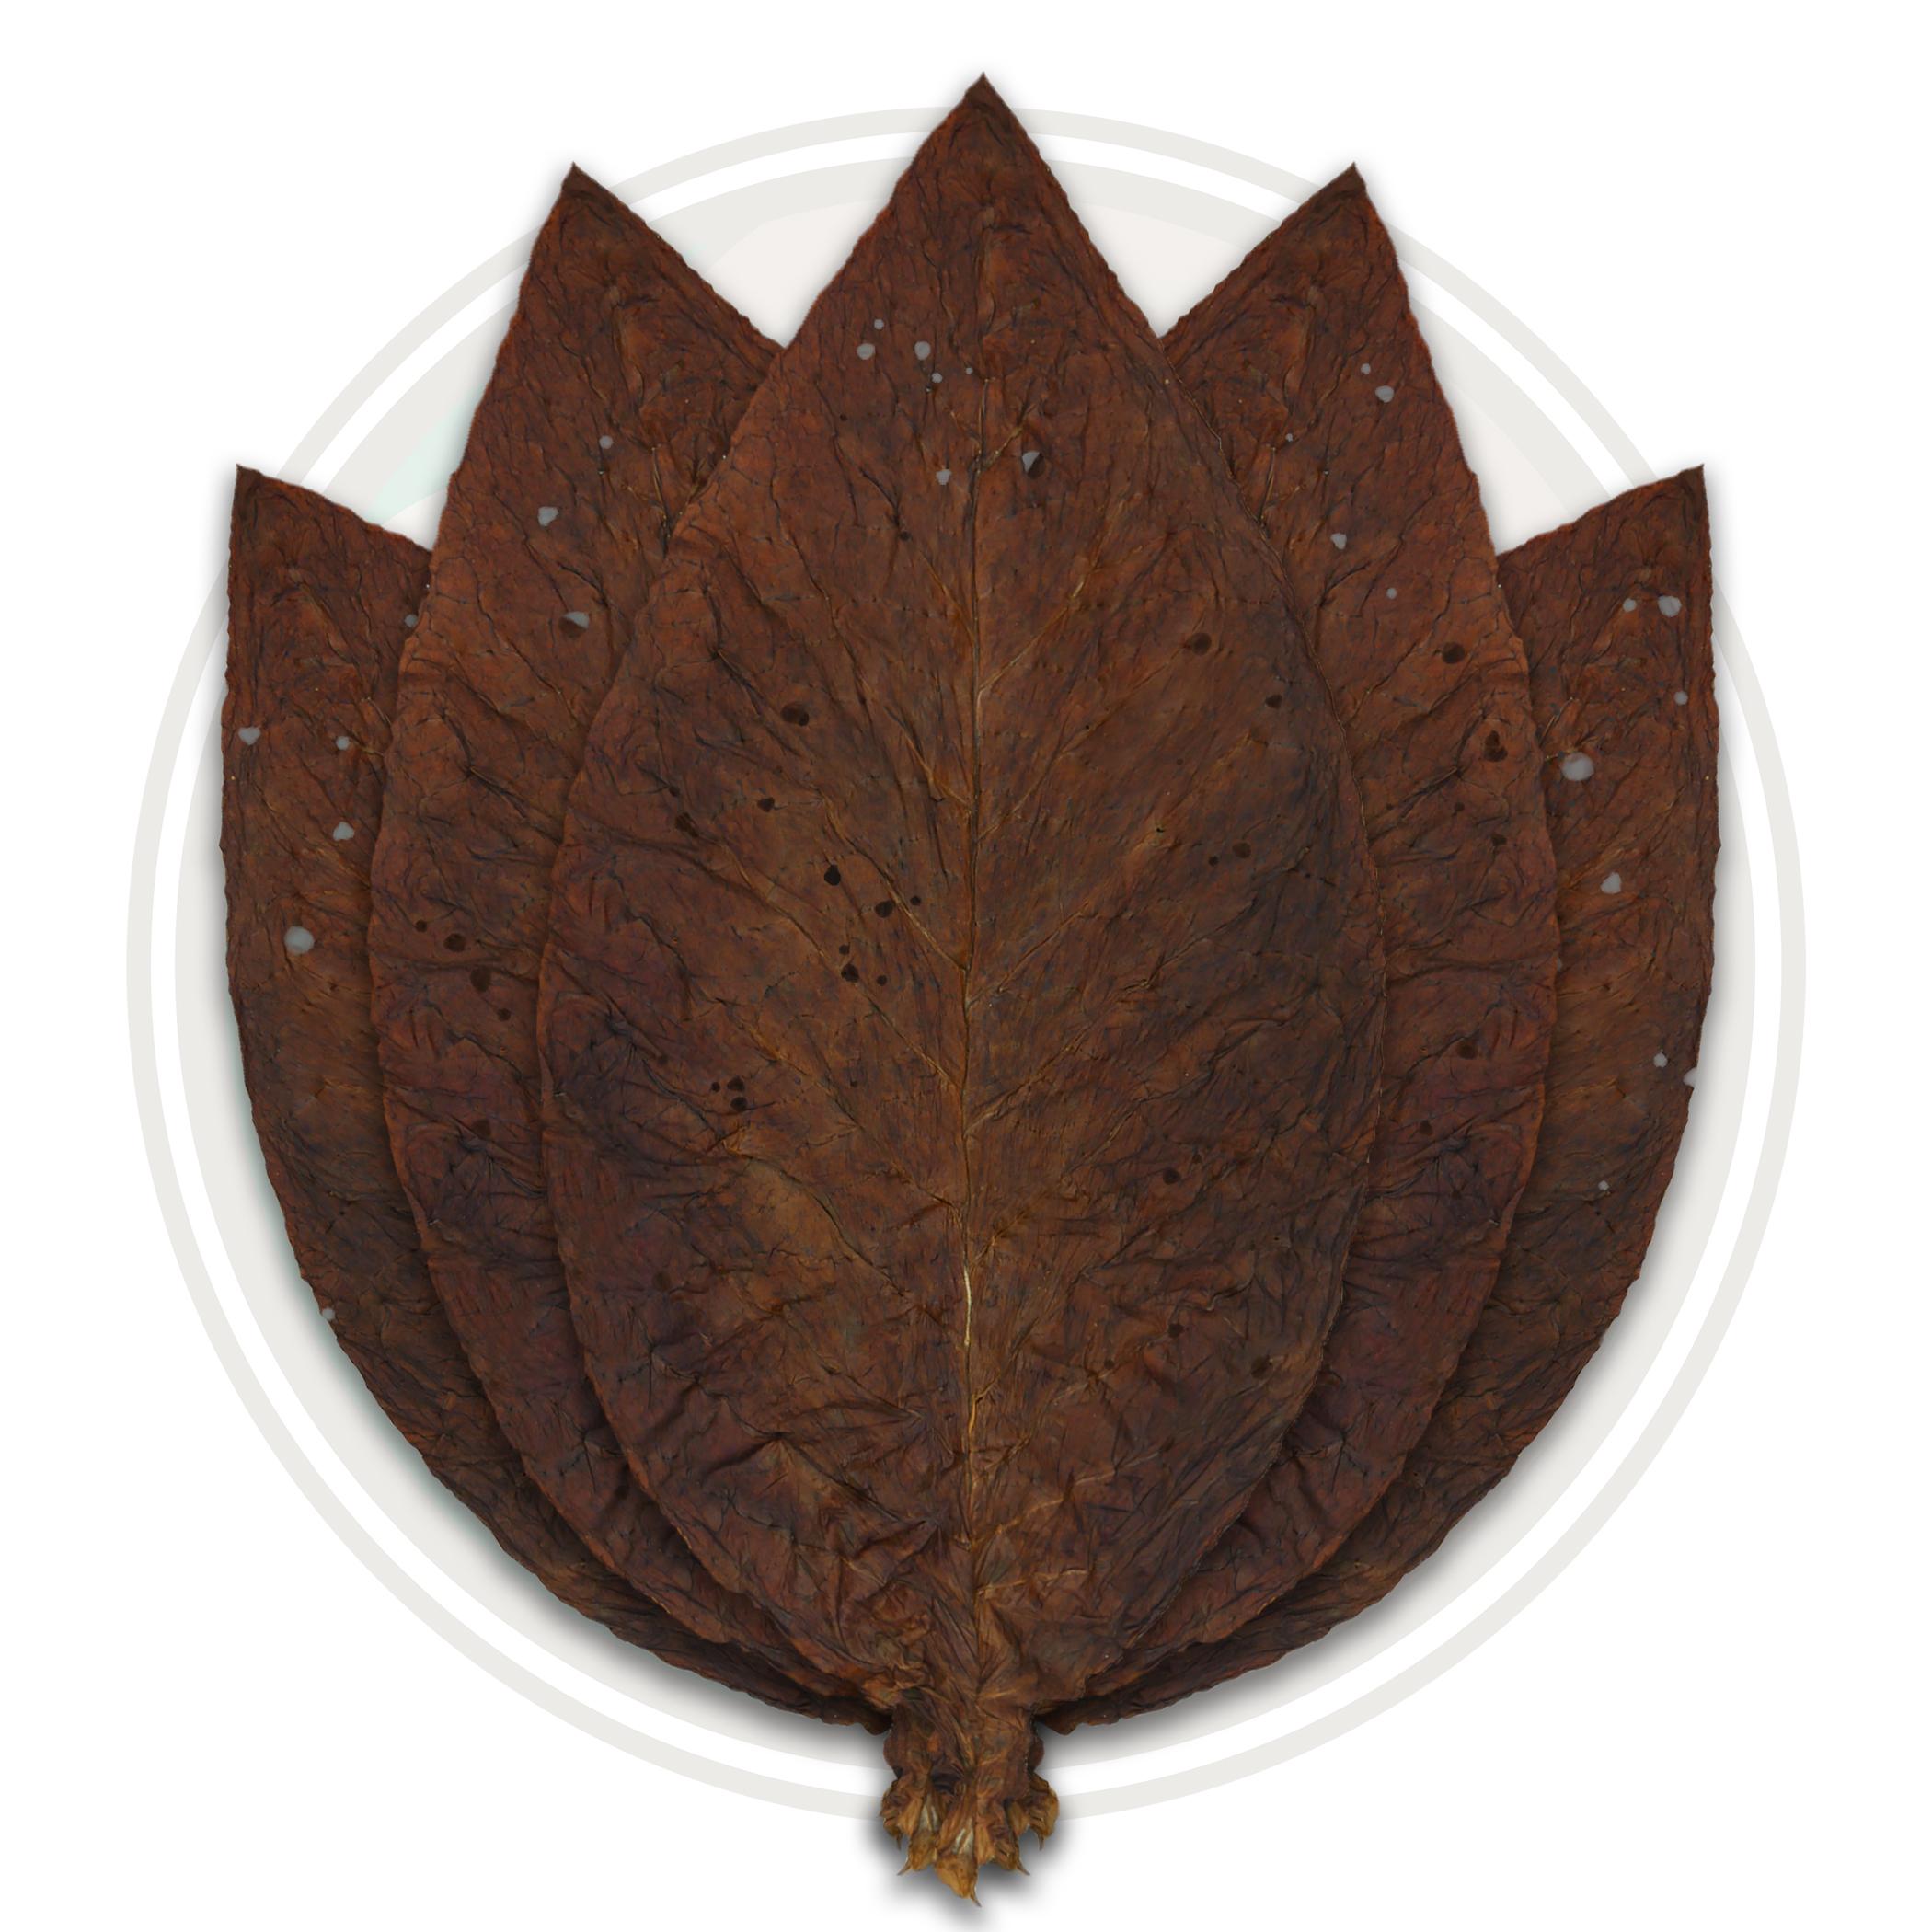 Dark Air Cured J2 Fronto Grabba Whole Tobacco Leaf Only